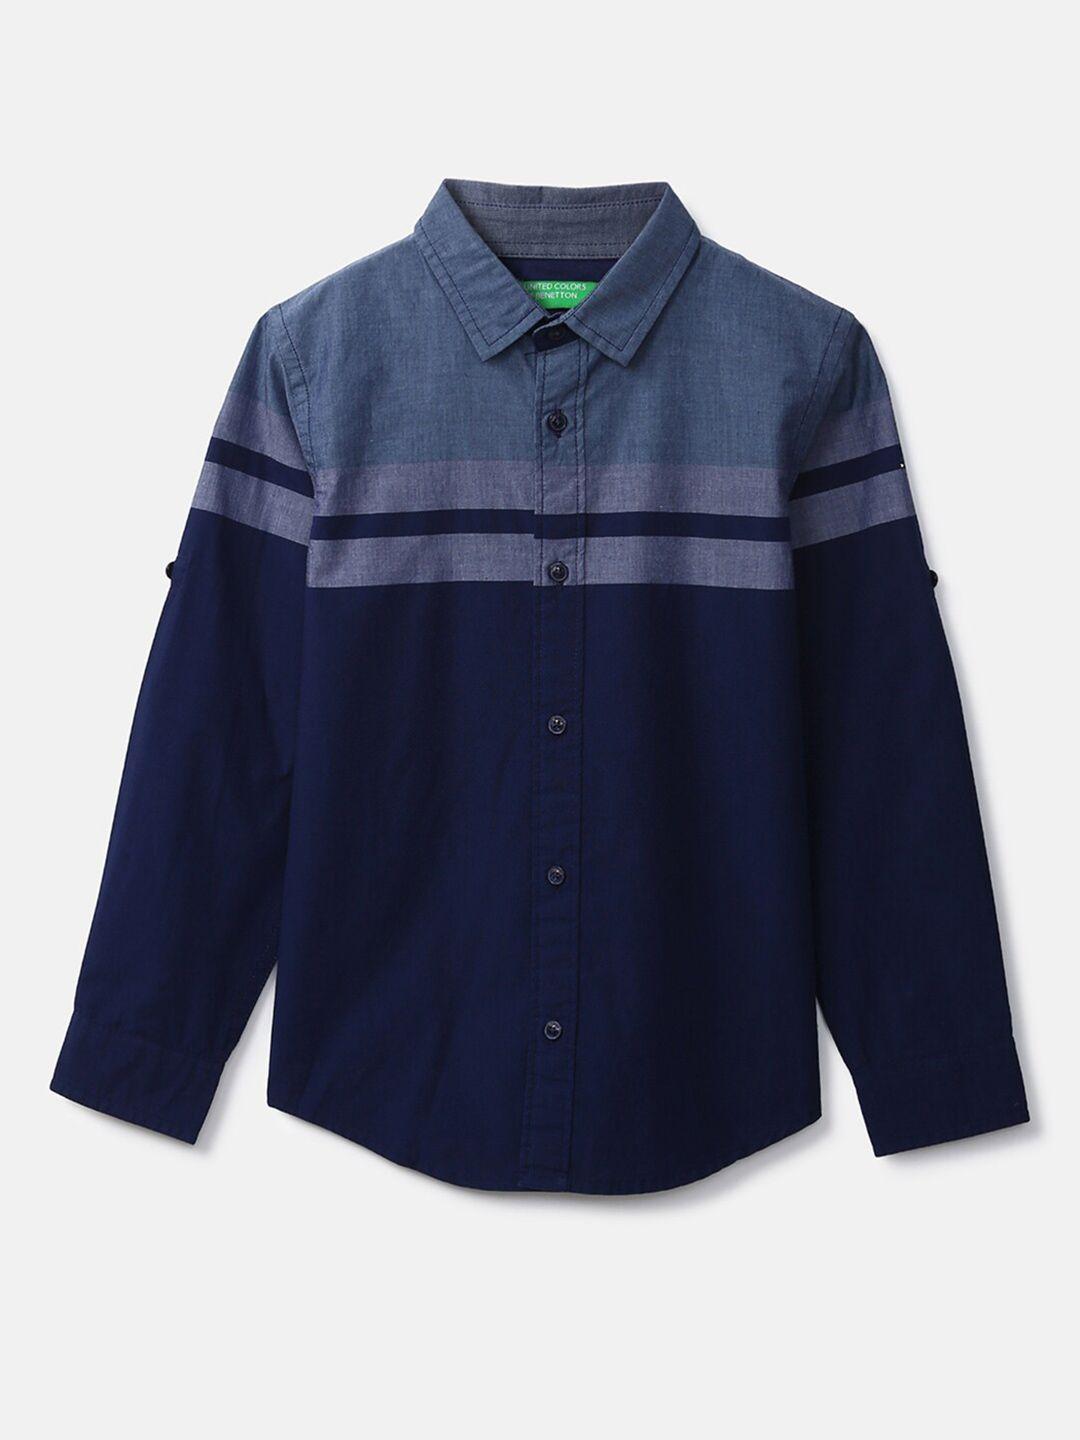 united-colors-of-benetton-boys-navy-blue-horizontal-striped-cotton-casual-shirt